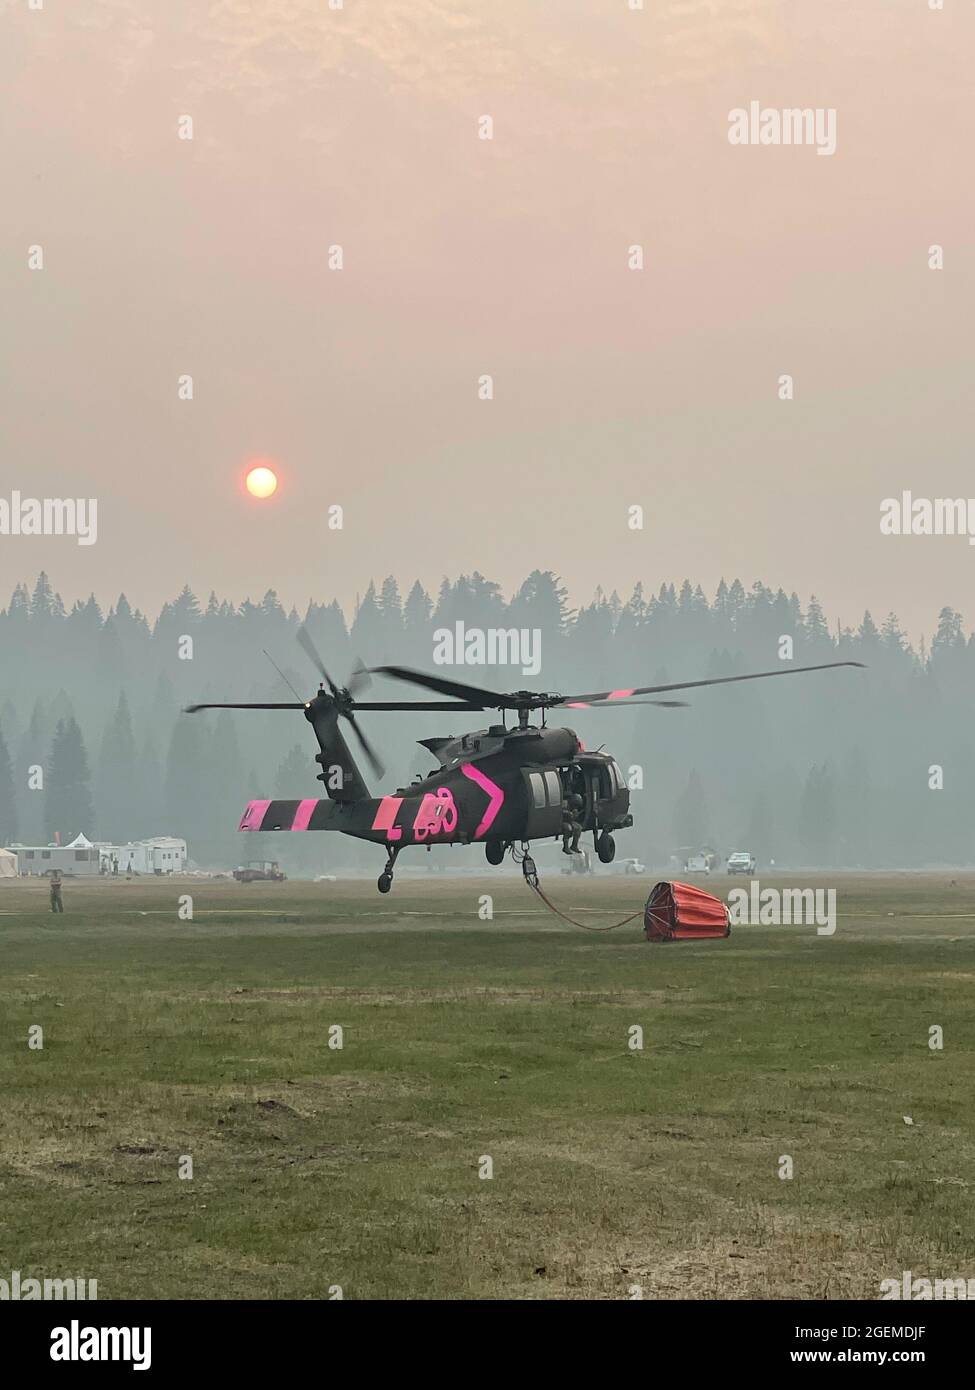 A U.S. Army UH-60 Black Hawk helicopter flown by the California Army National Guard lands at the Battle Creek helibase near Mineral, California, Aug. 17, 2021, while fighting the Dixie Fire. The fire eclipsed 600,000 acres and is currently the second-largest fire in California’s recorded history. (U.S. Army National Guard photo by 1st Lt. Rockne Harmon) Stock Photo